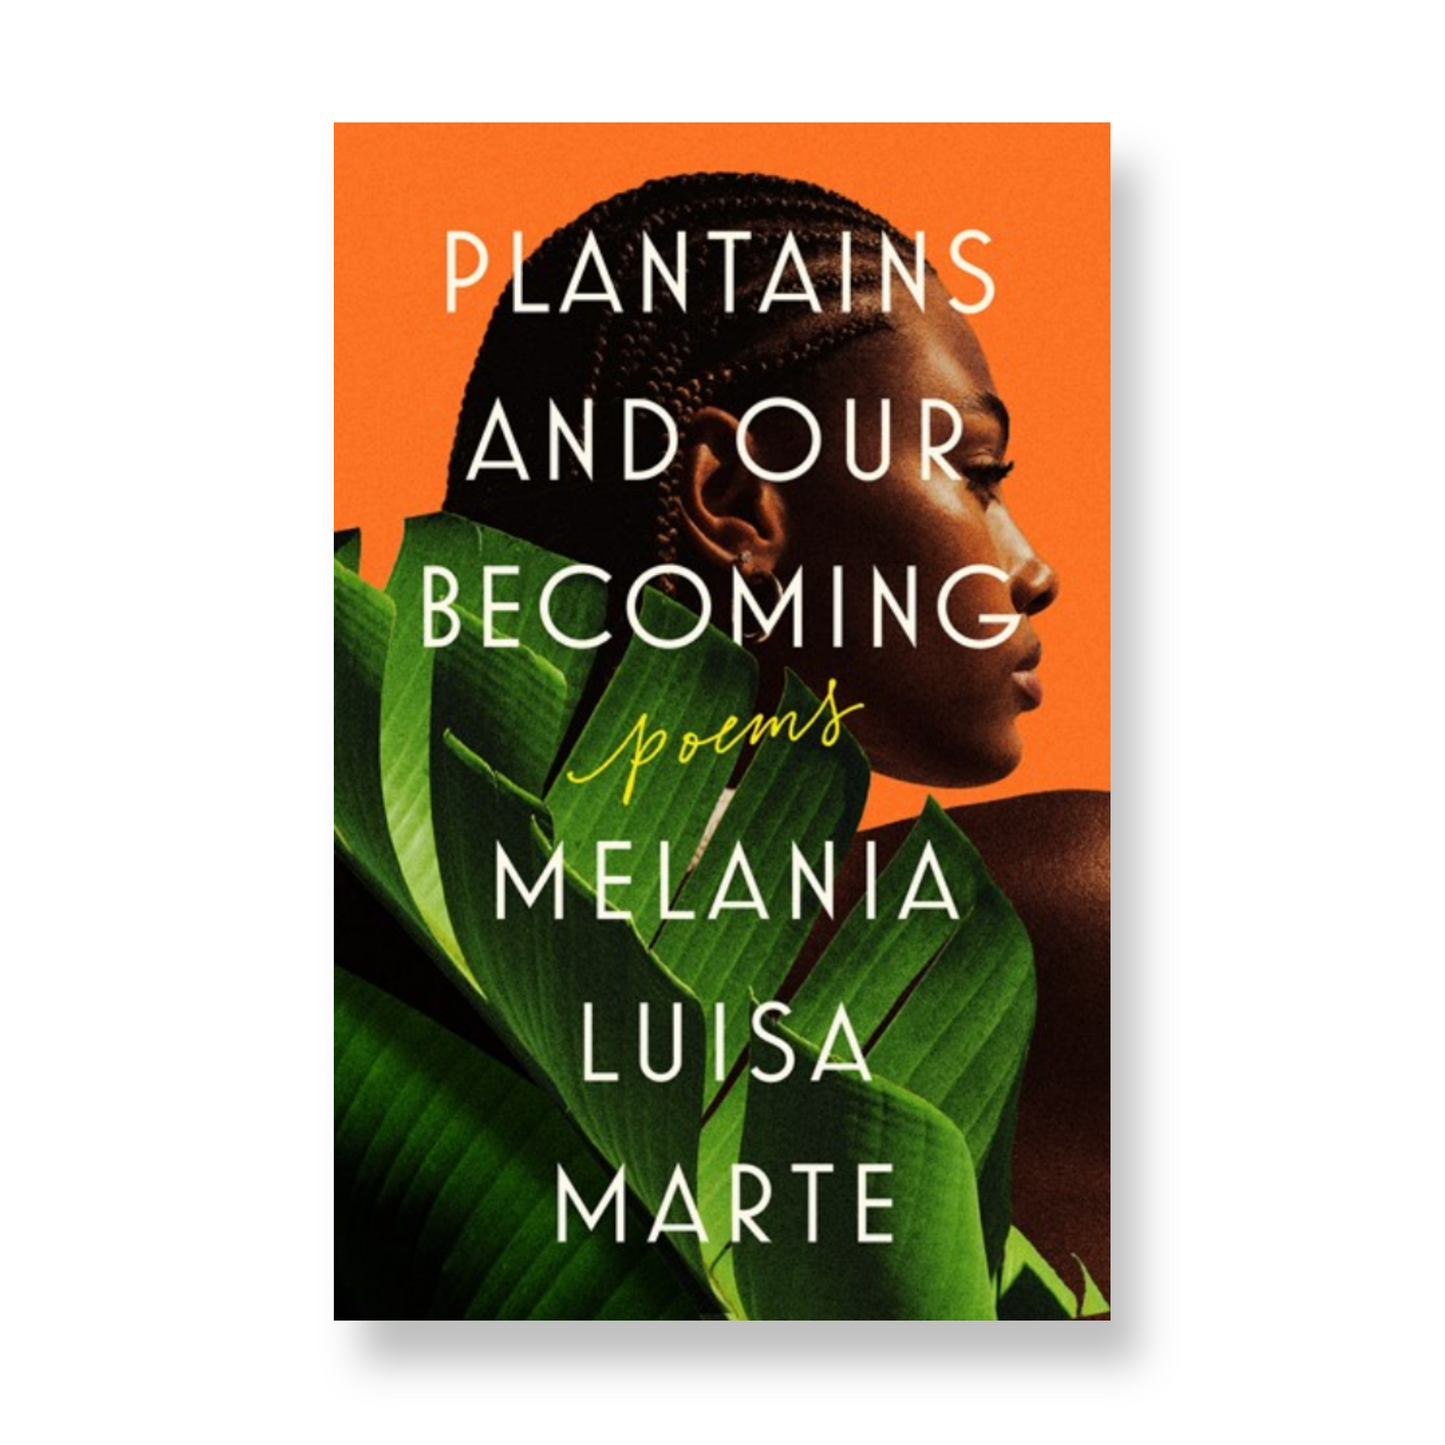 Plantains and Our Becoming: Poems